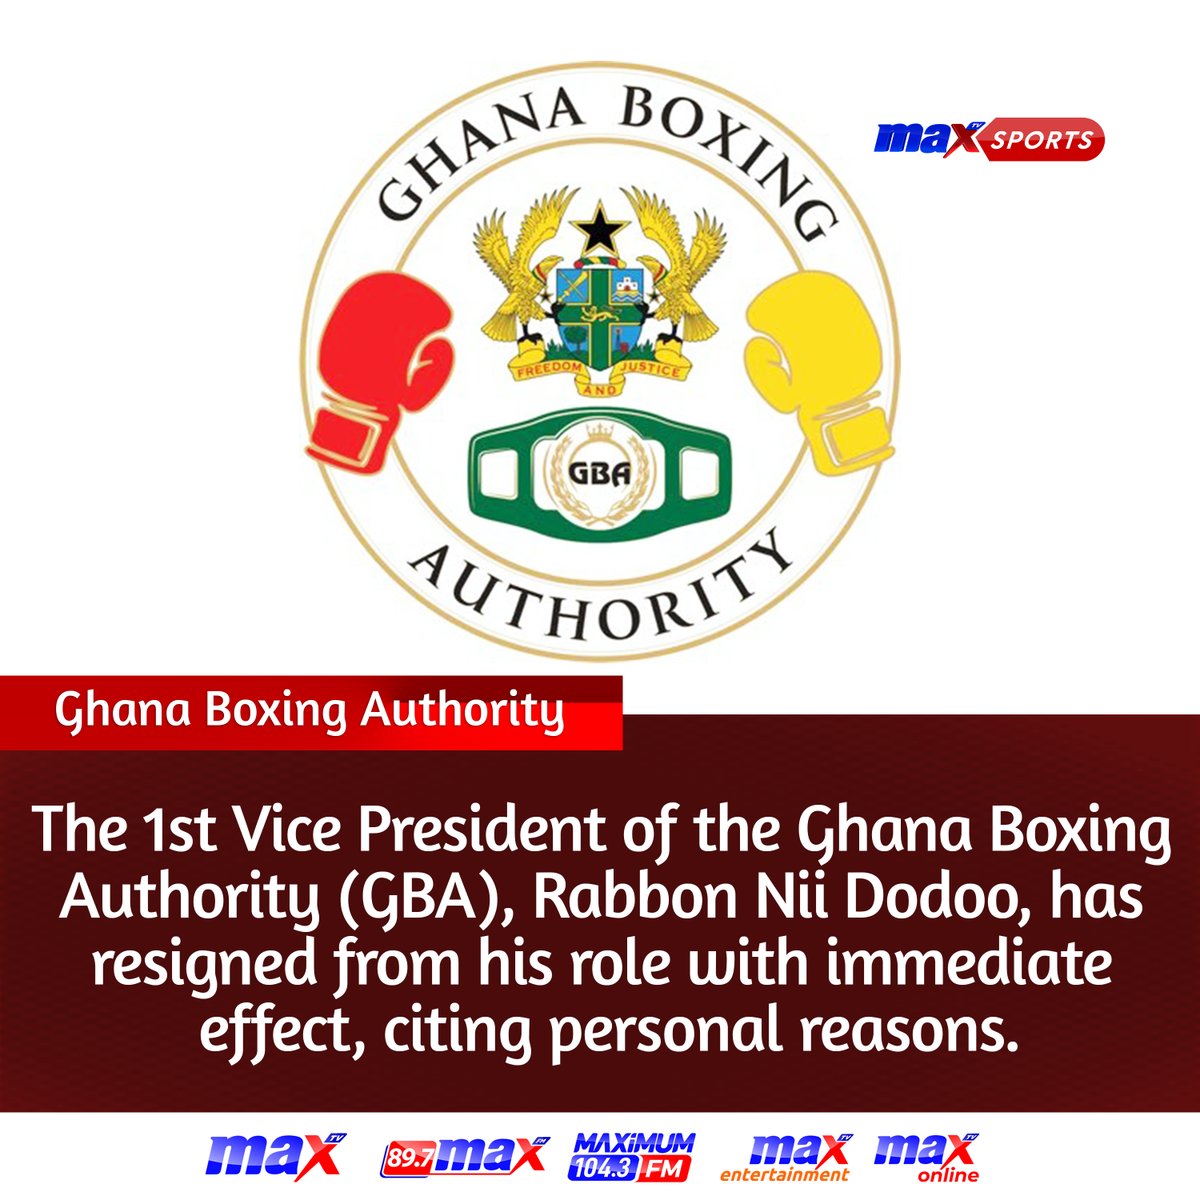 The 1st Vice President of the Ghana Boxing Authority (GBA), Rabbon Nii Dodoo, has resigned from his role with immediate effect, citing personal reasons. #MaxSports #GBA #MaxTV #MaxOnline